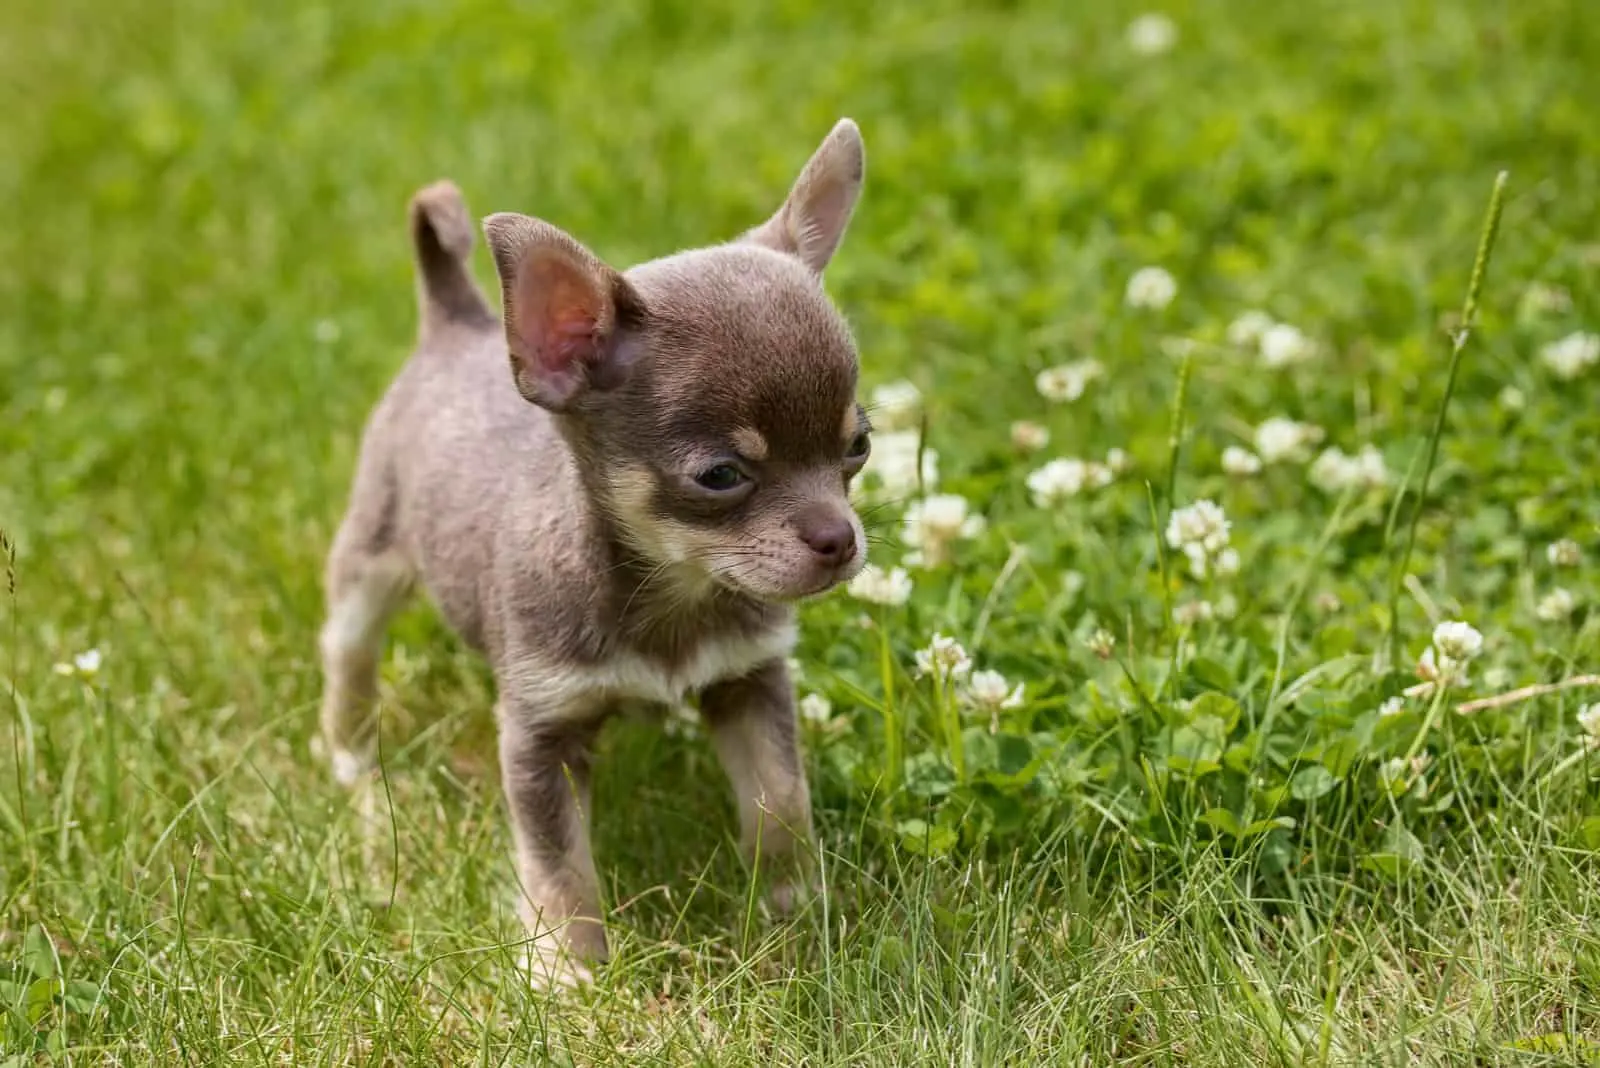 Puppy Chihuahua stands on the grass